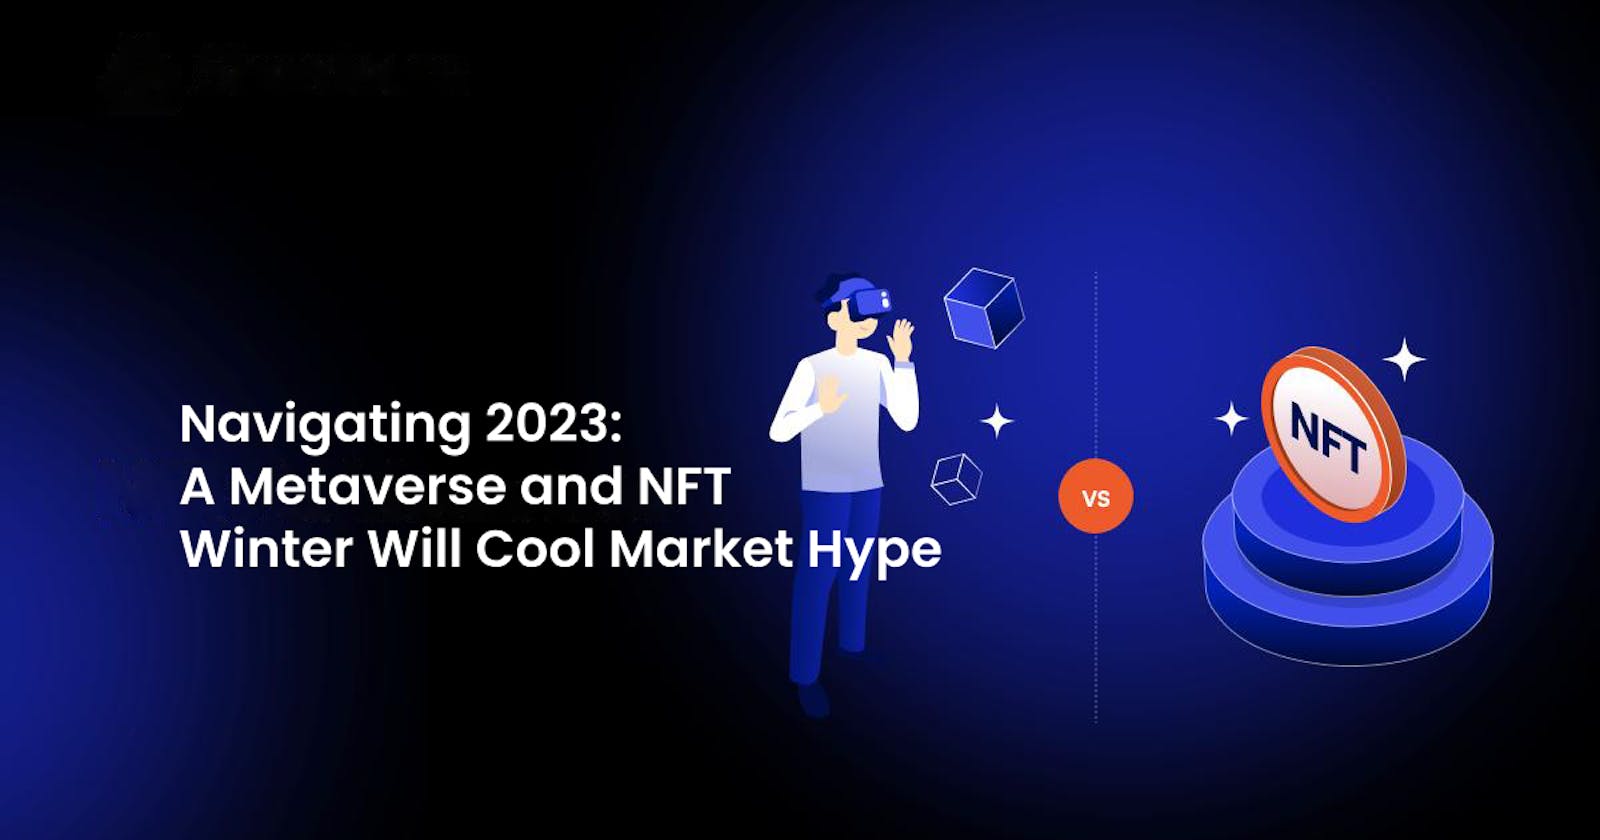 Navigating 2023: A Metaverse and NFT Winter Will Cool Market Hype